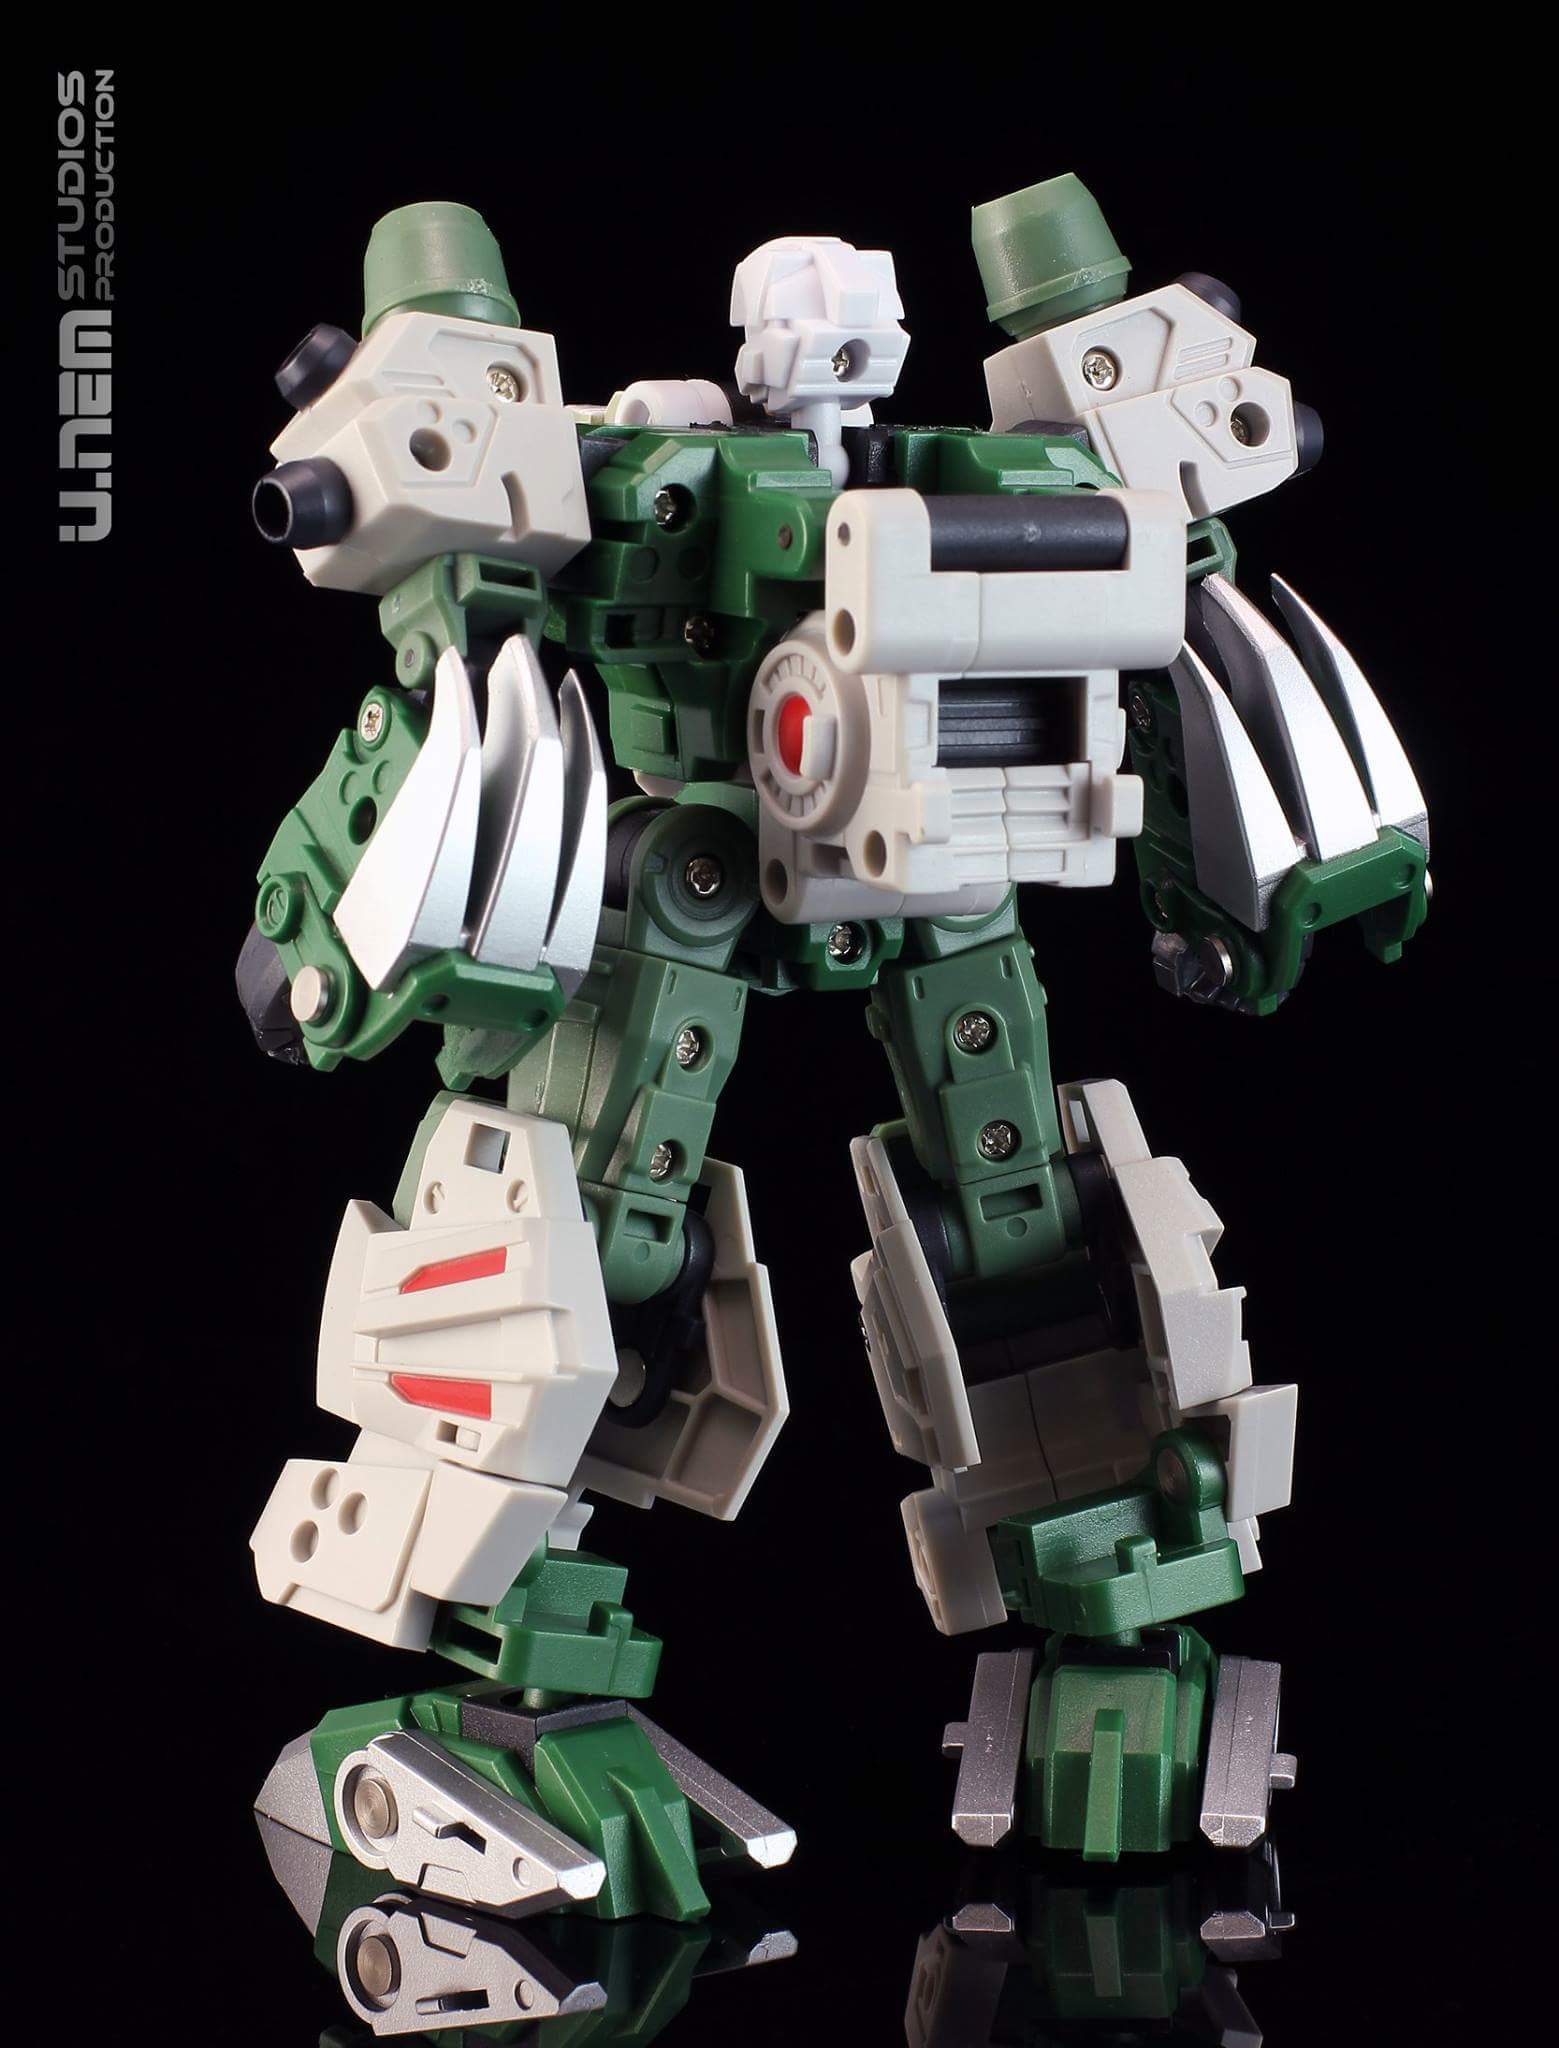 [FansProject] Produit Tiers - Ryu-Oh aka Dinoking (Victory) | Beastructor aka Monstructor (USA) - Page 3 B58xjp3G